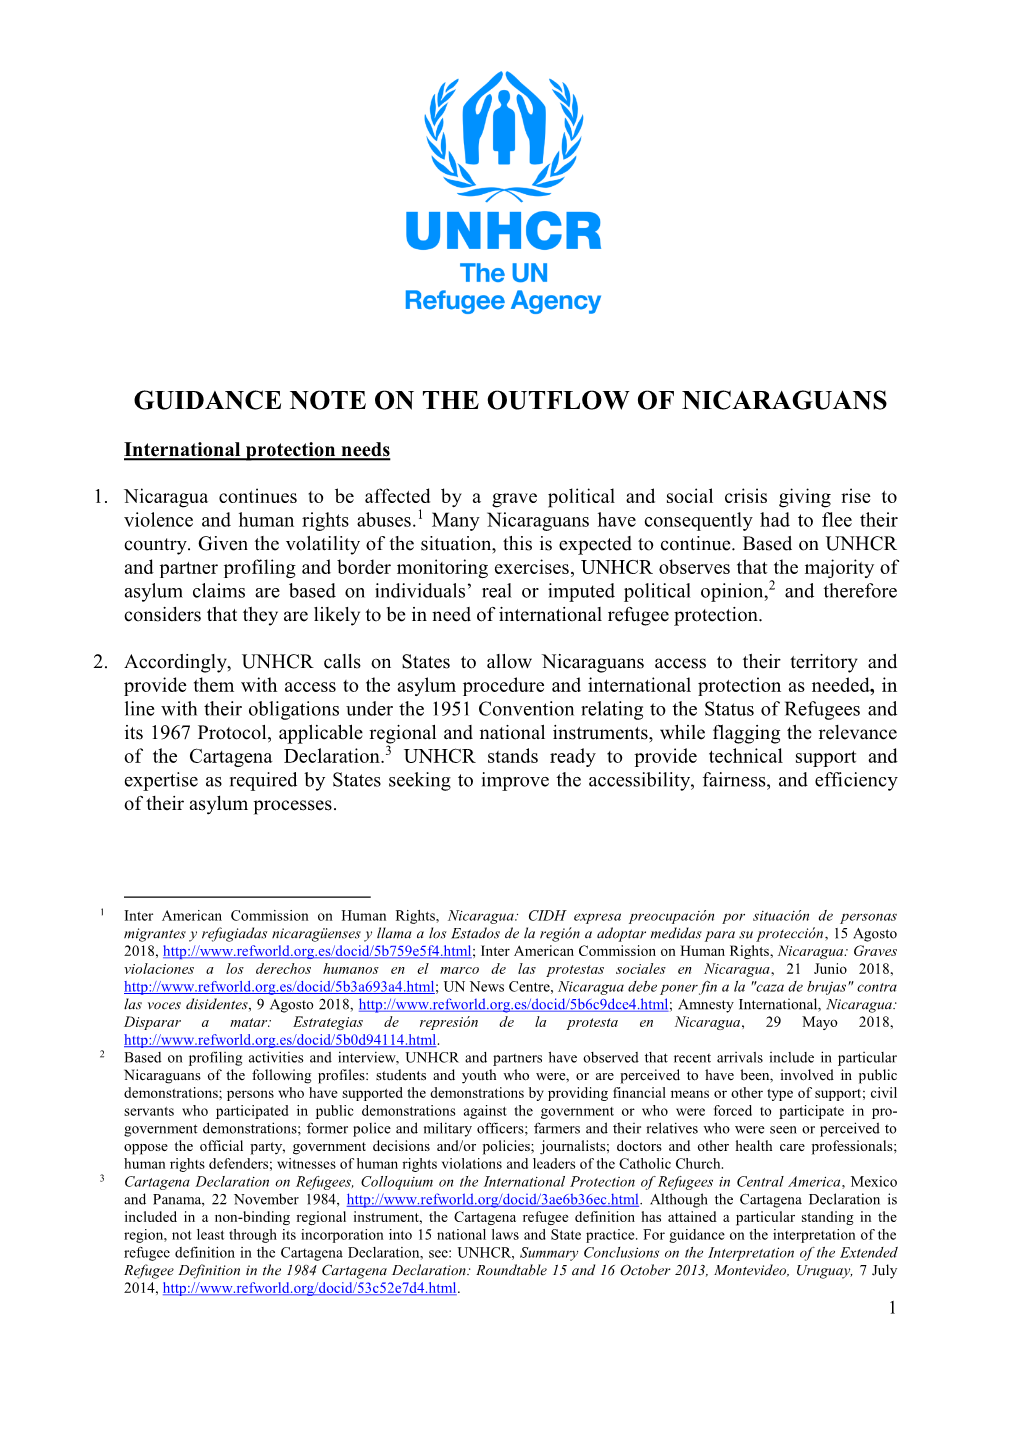 Guidance Note on the Outflow of Nicaraguans